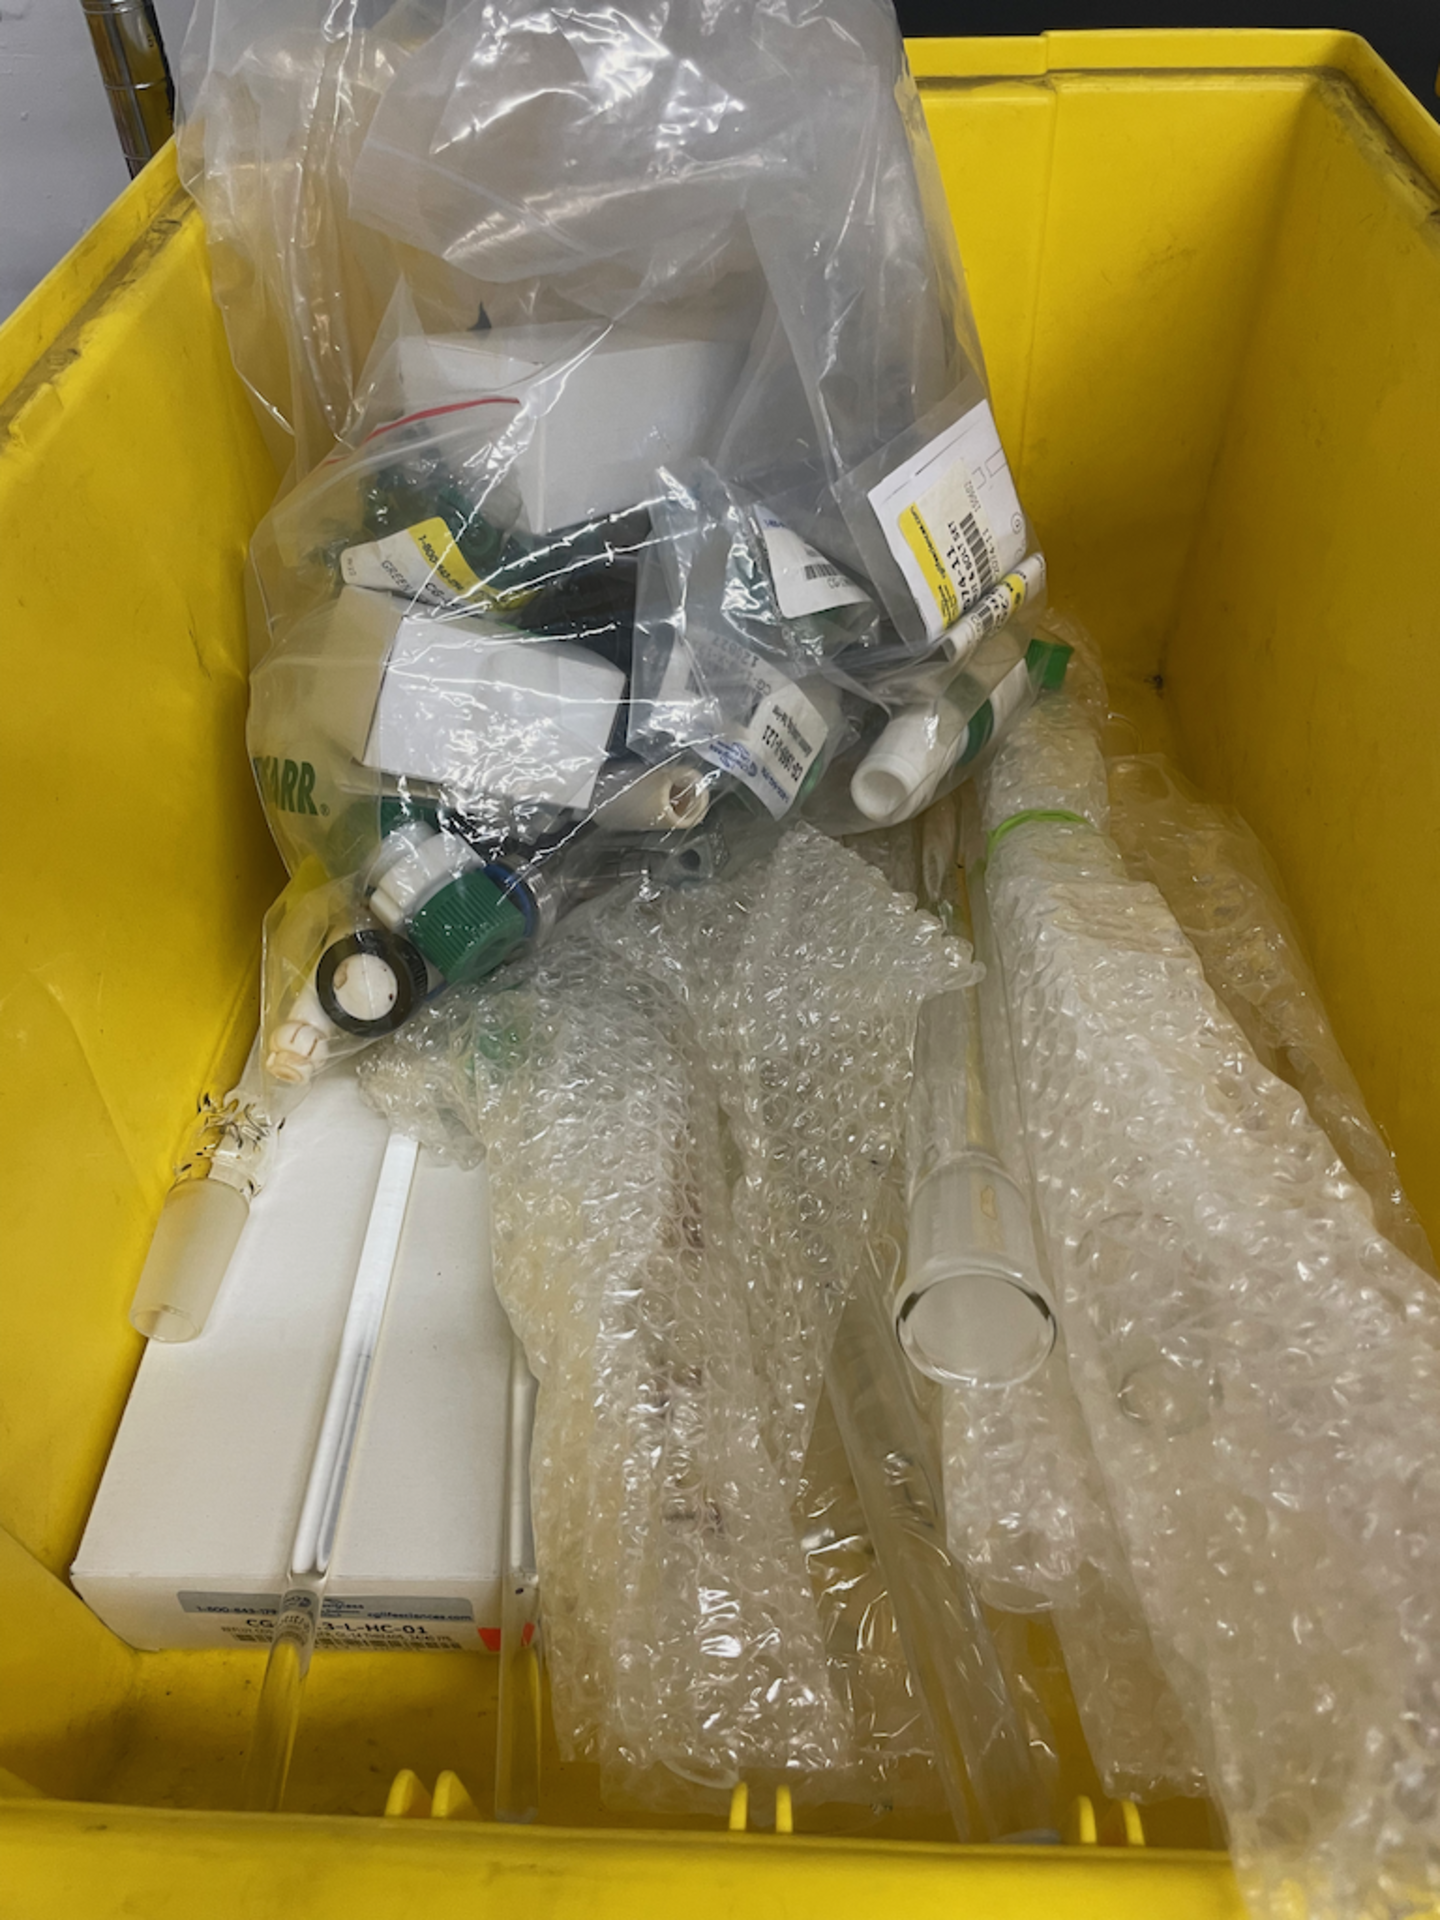 CHEMGLASS LOT CONSISTING OF THE CONTENTS OF QTY-4 YELLOW TOTE BINS CONTAINING VARIOUS CHEMGLASS - Image 8 of 9